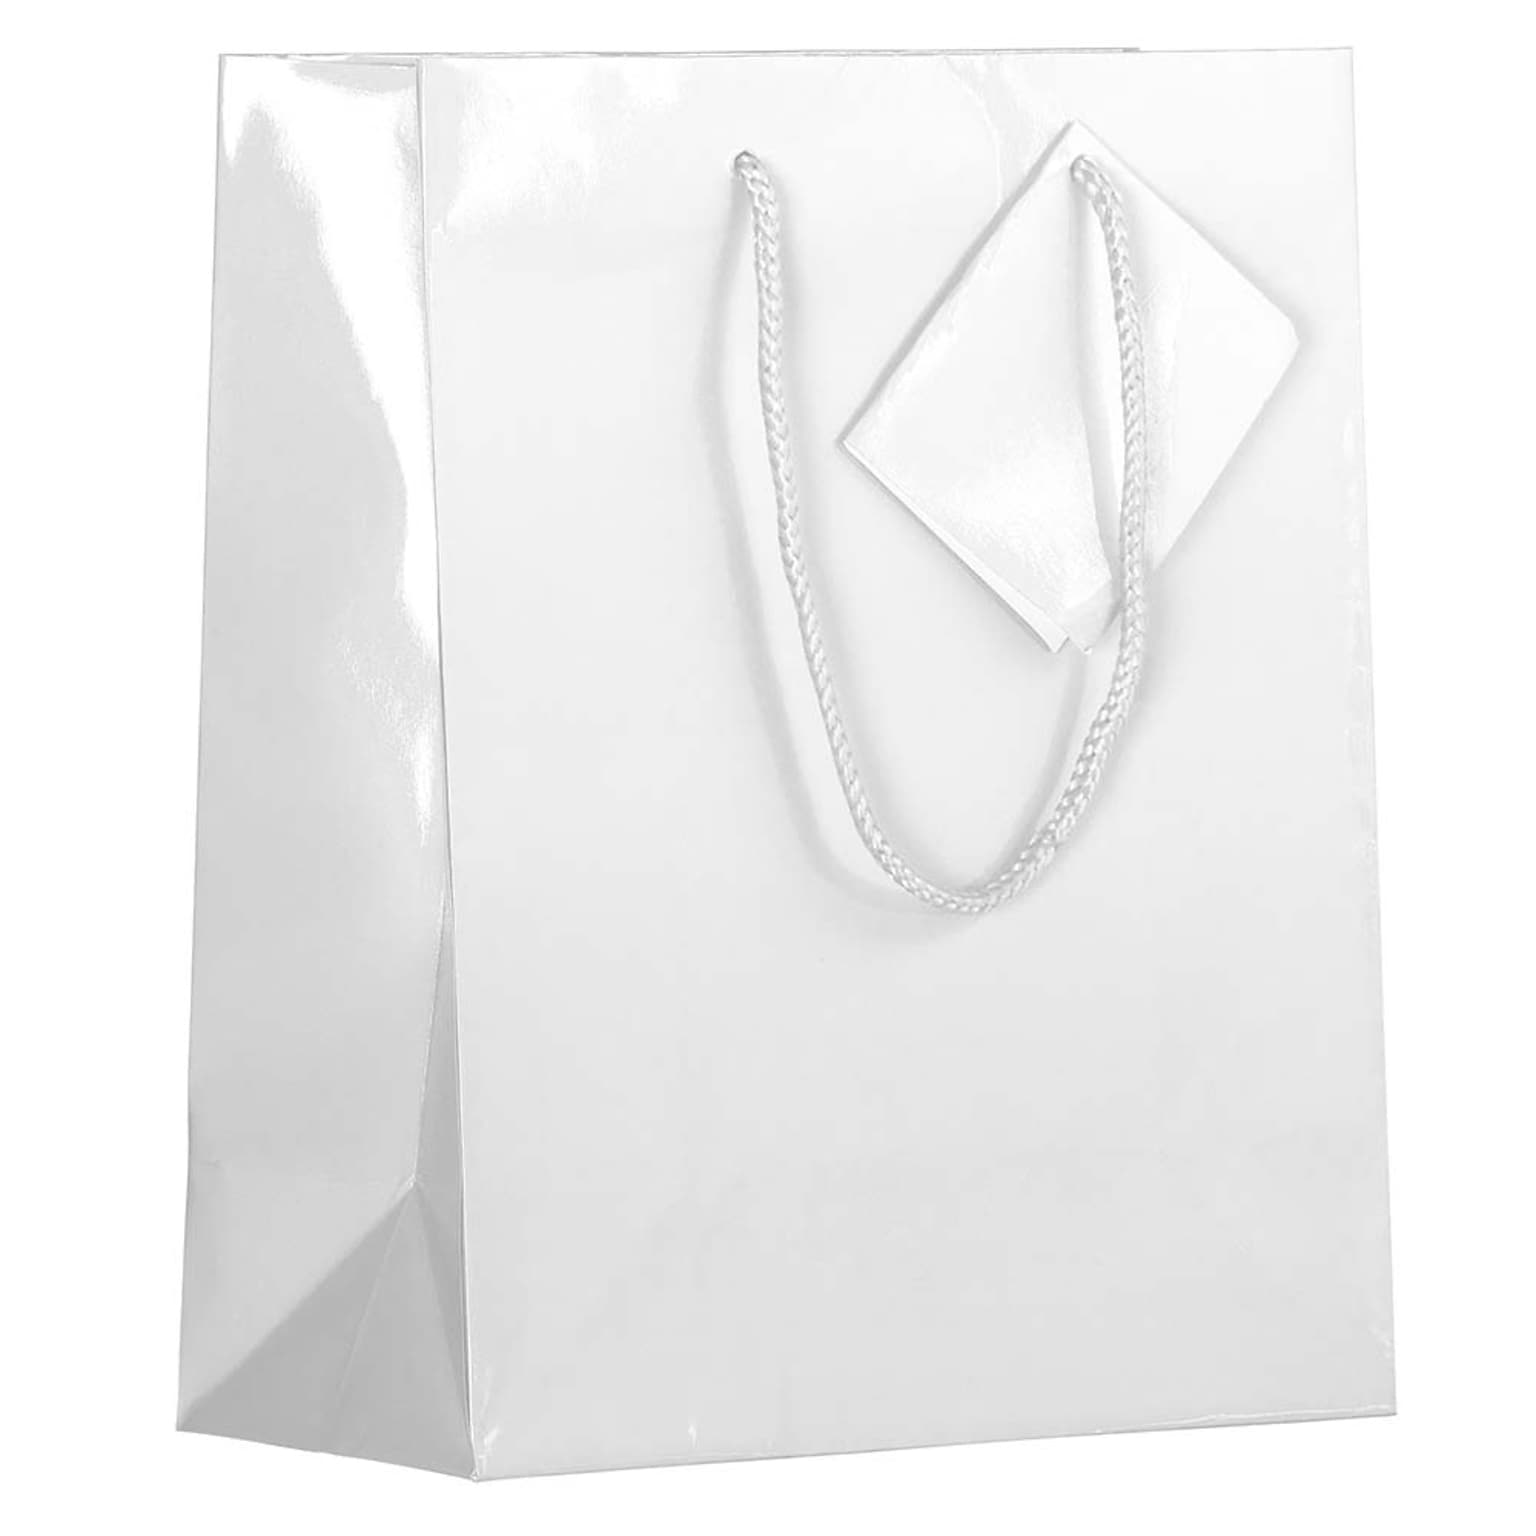 JAM PAPER Glossy Gift Bags with Rope Handles, Medium, 8 x 10, White, 3 Bags/Pack (672GLWHB)